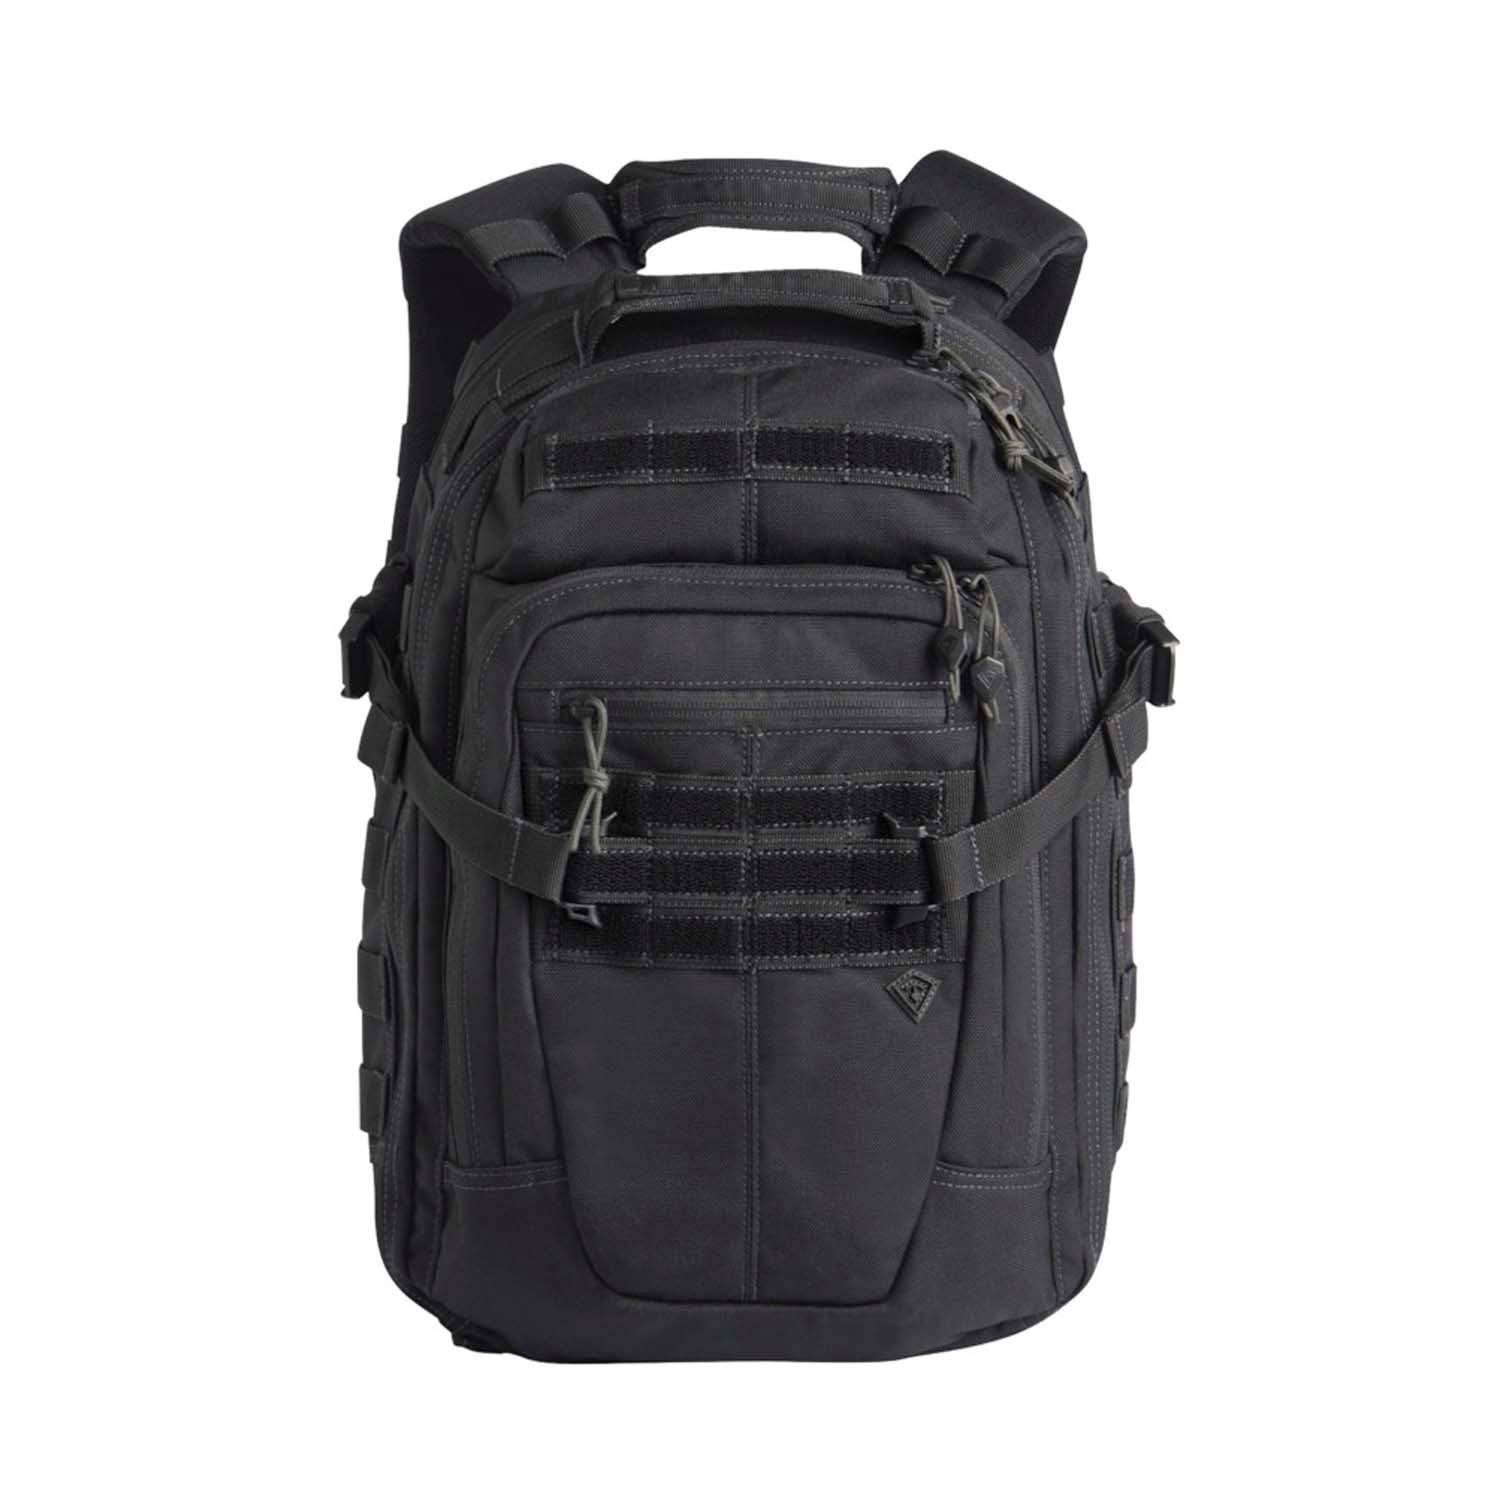 FIRST TACTICAL SPECIALIST HALF-DAY BACKPACK